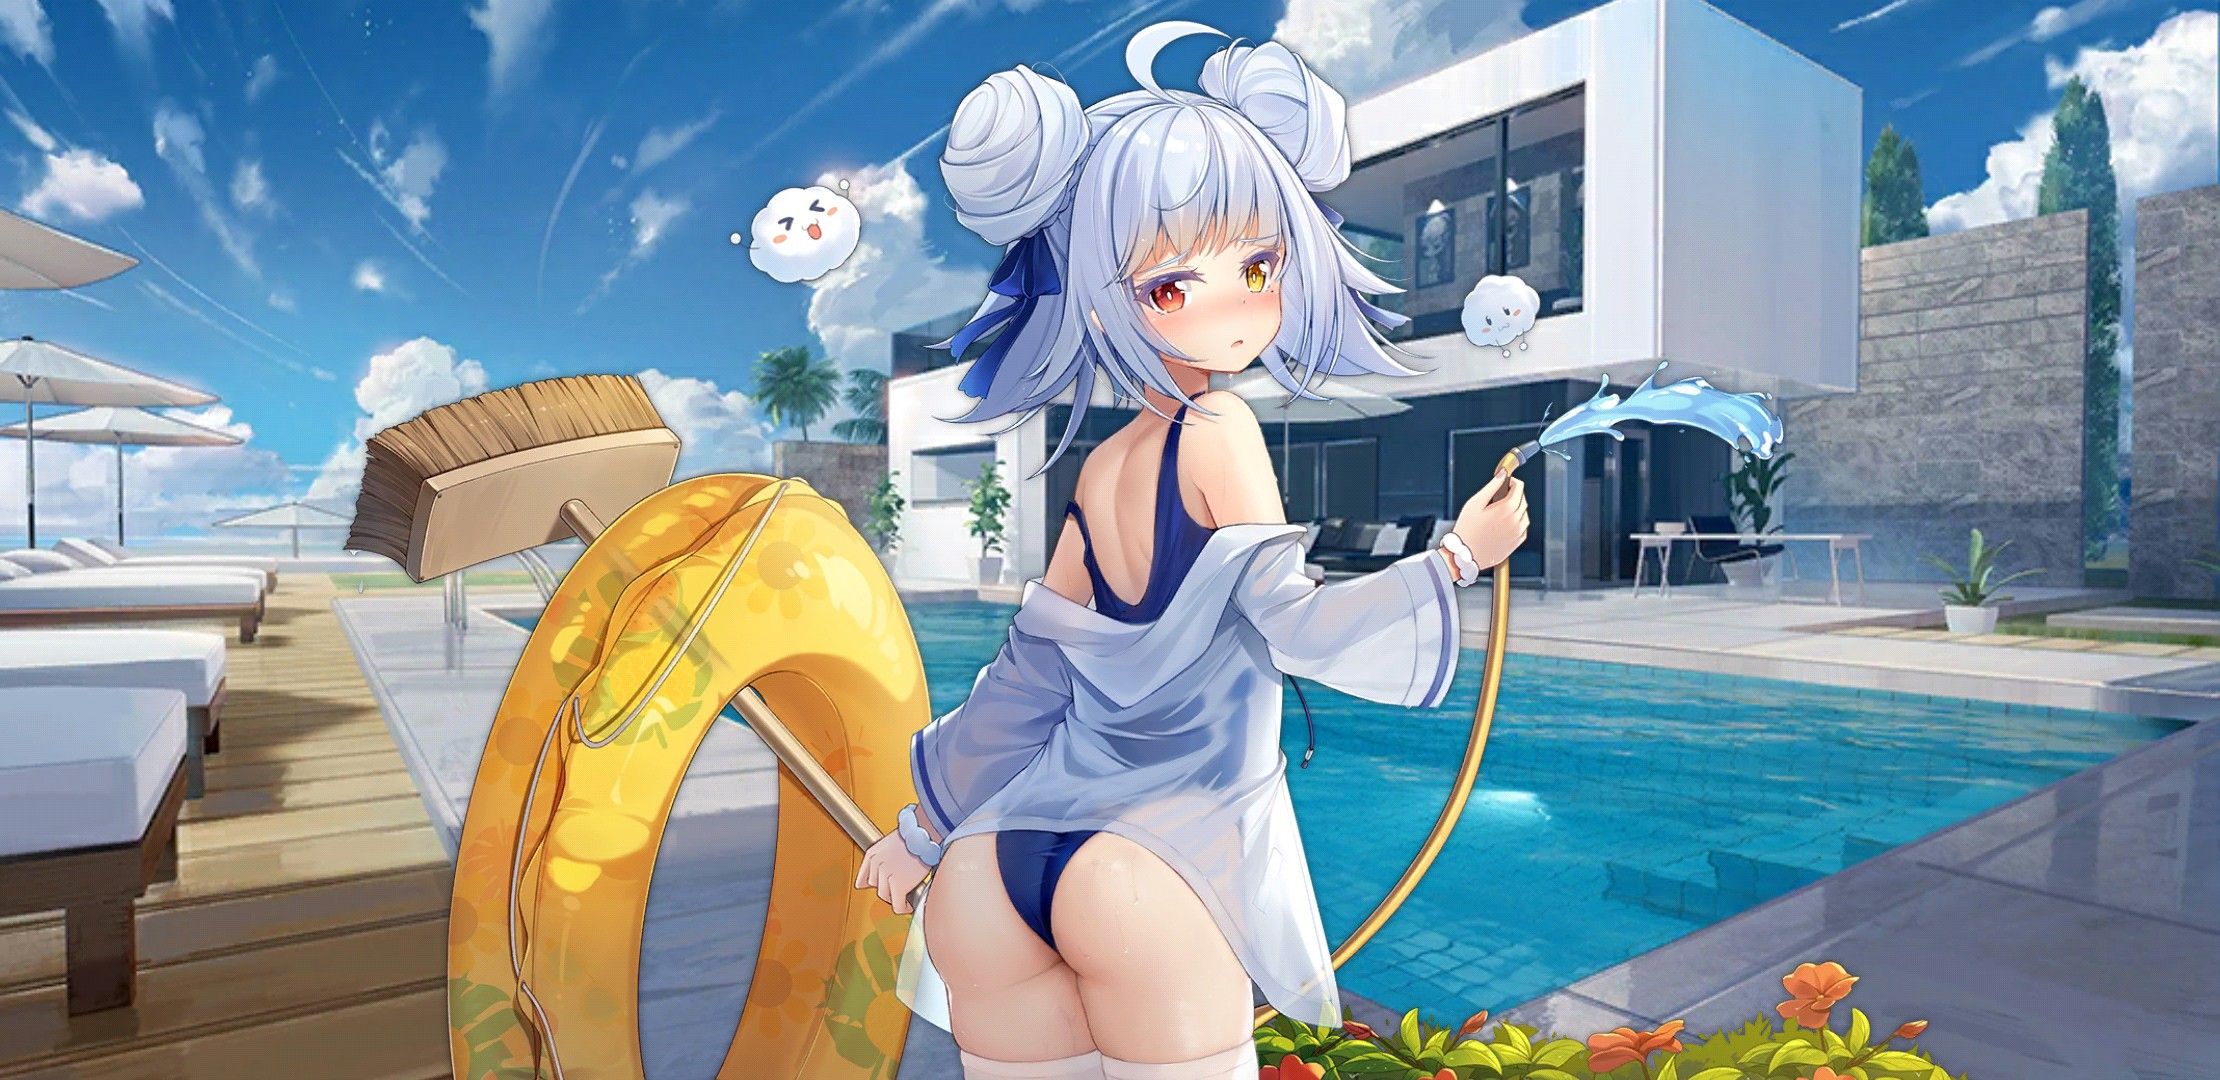 【There is an image】 Smartphone that urges charging with erotic swimsuits is malicious 2